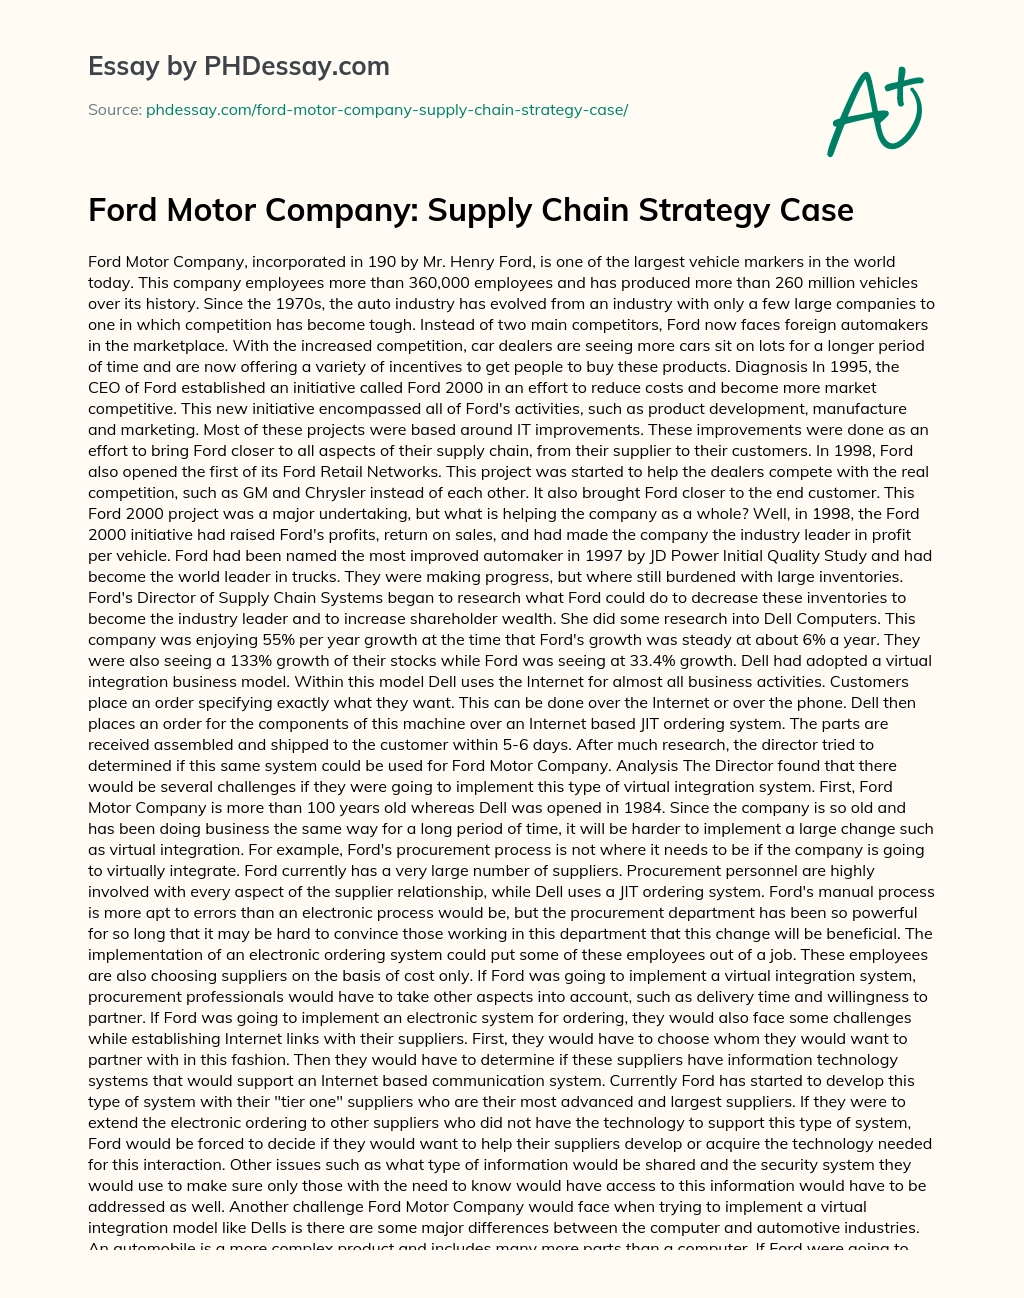 Ford Motor Company: Supply Chain Strategy Case essay